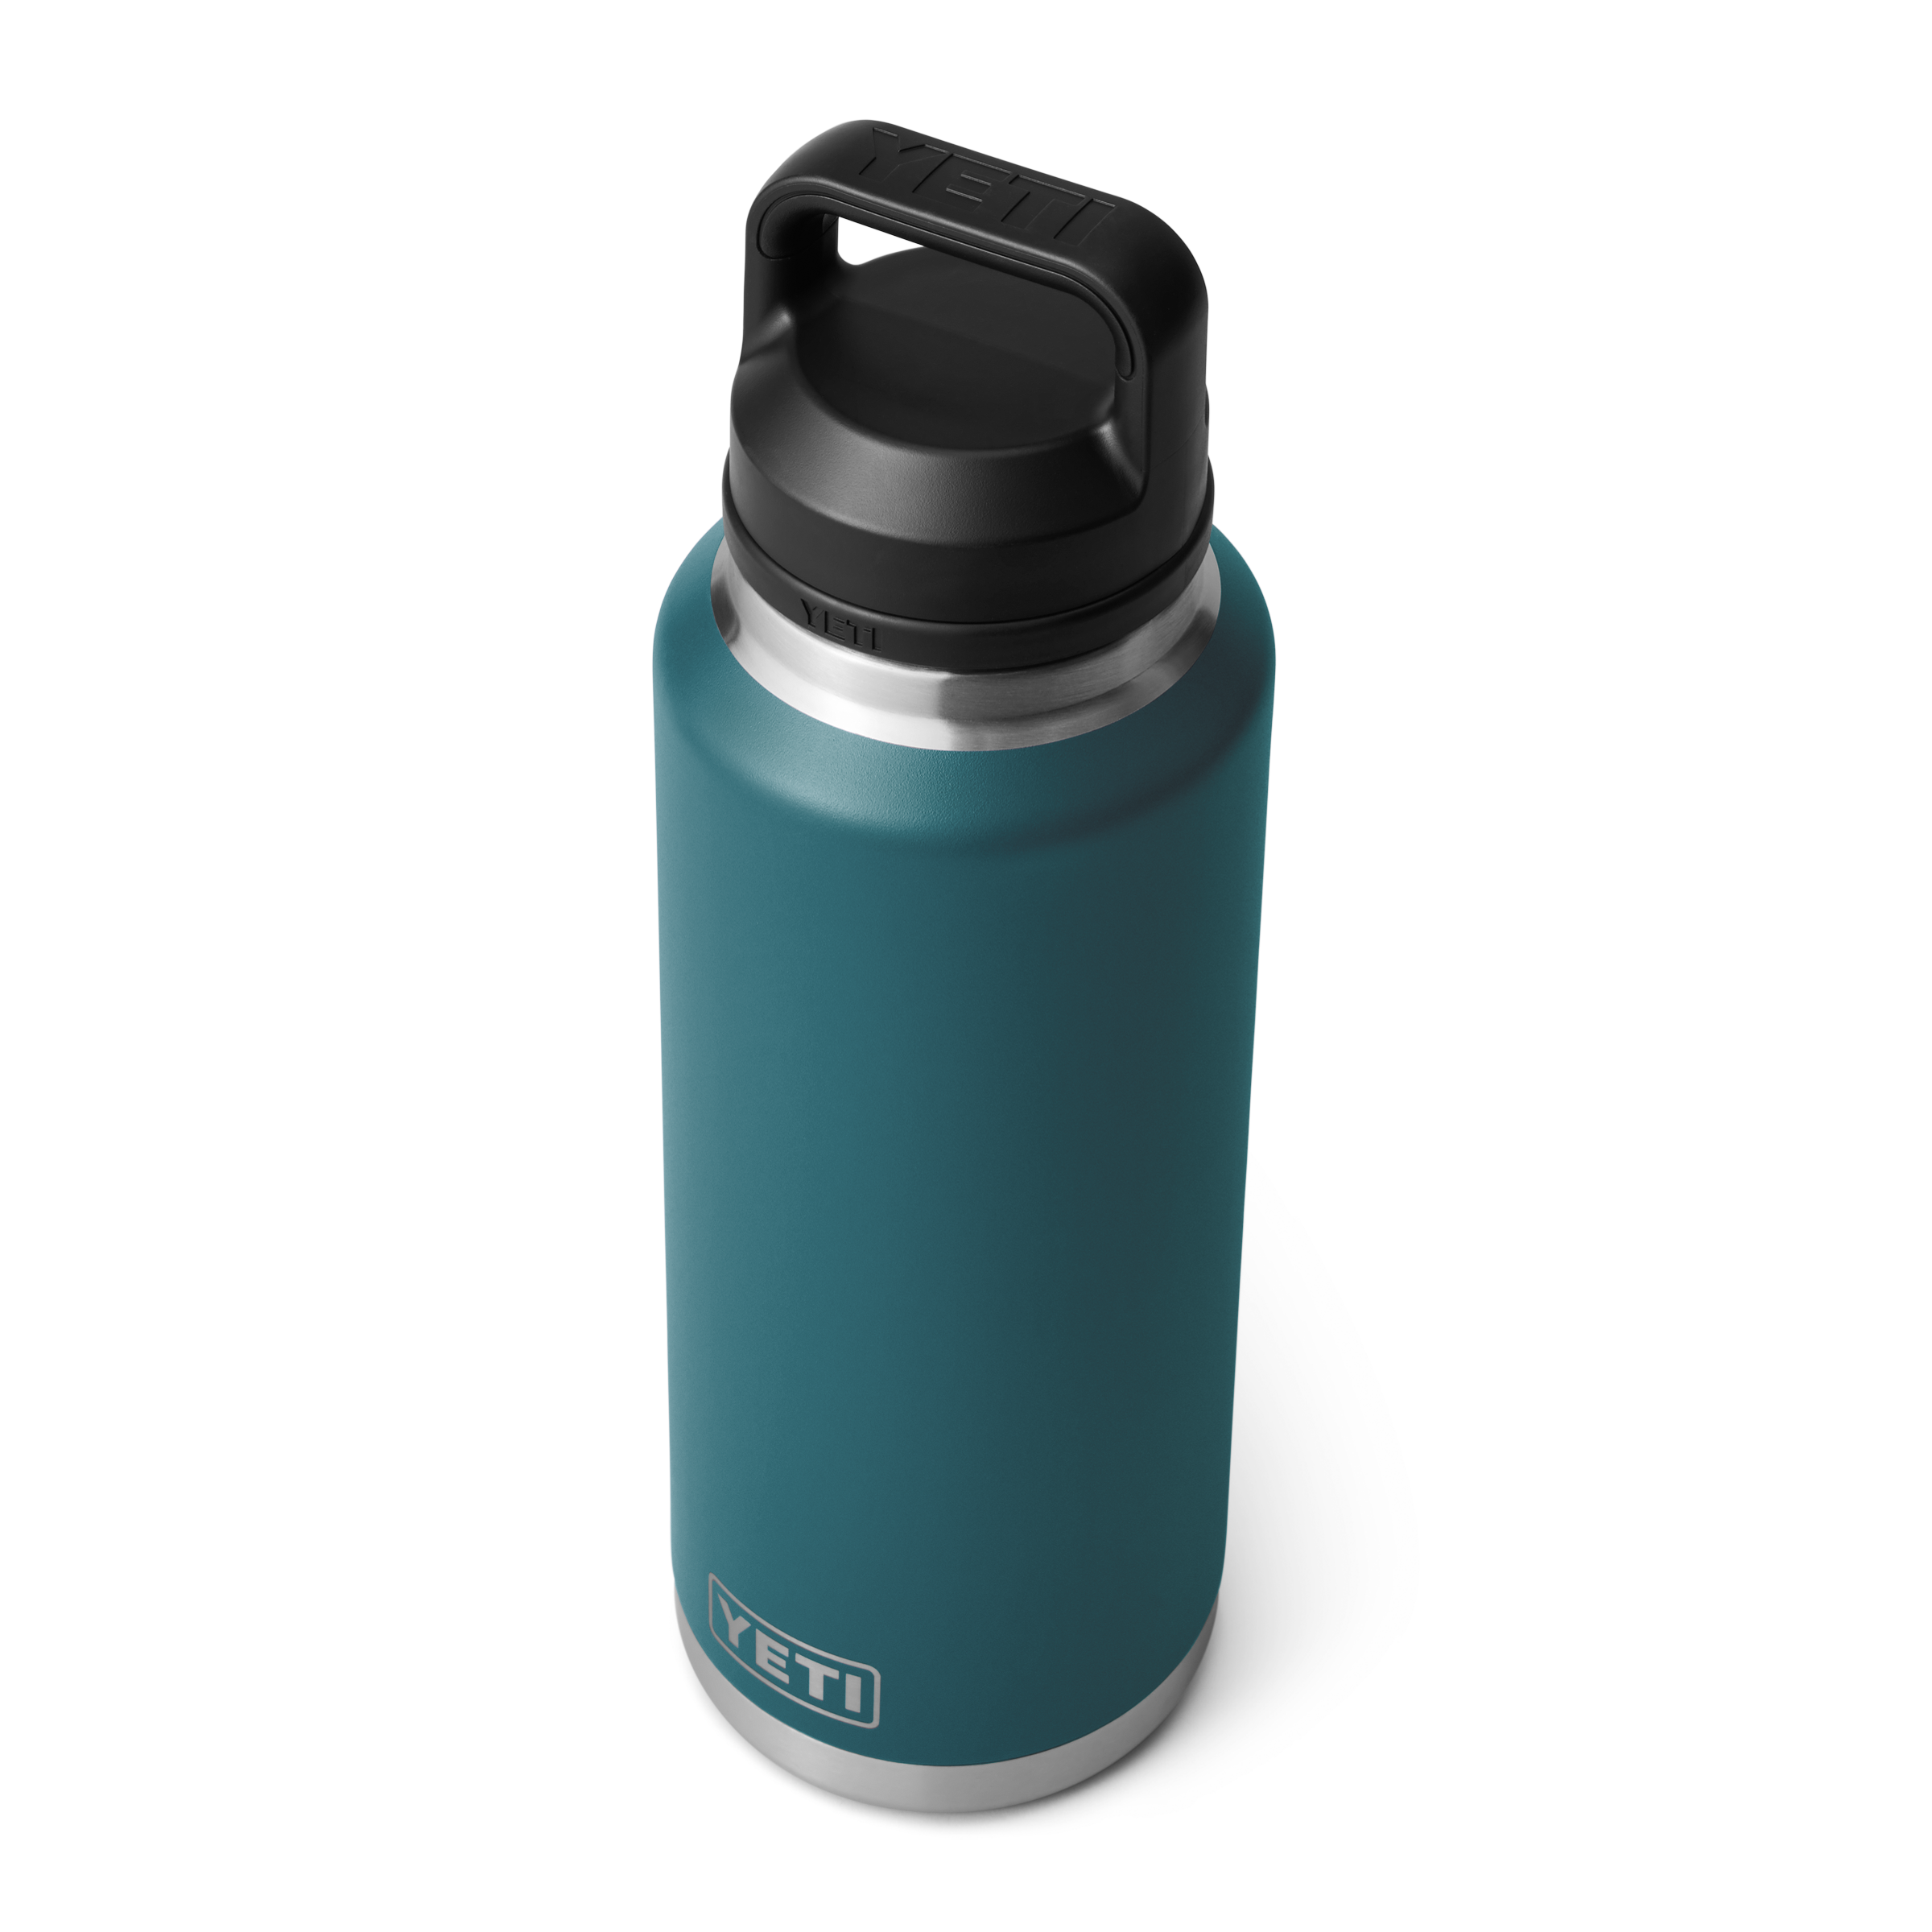 Teal, drink bottle, leak proof, easy to carry,  double wall vacuum insulated, keeps cool drinks cold, dishwasher safe